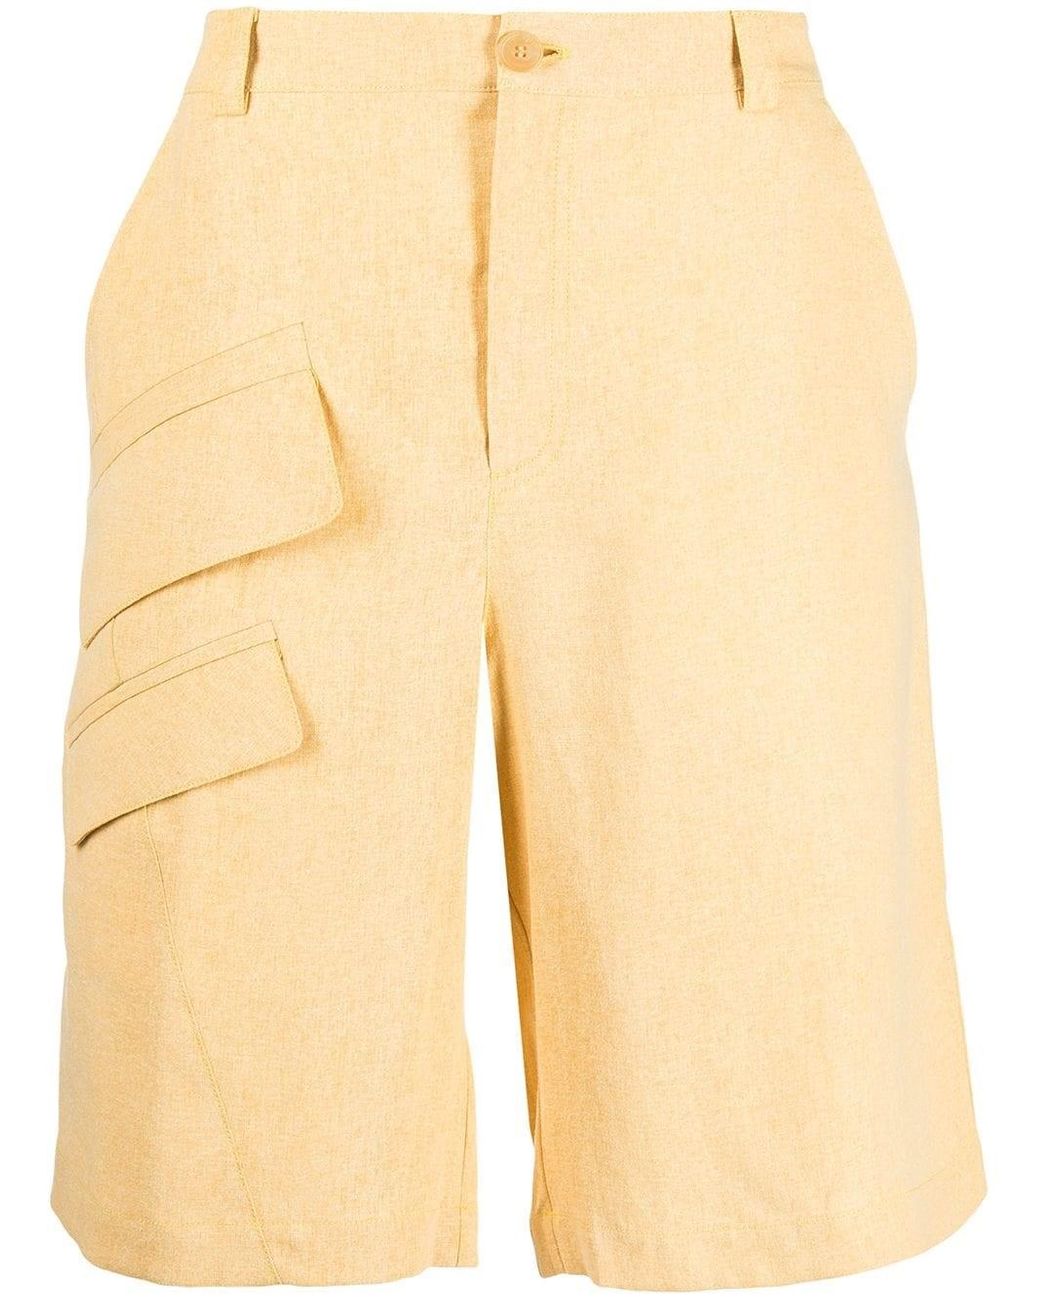 Jacquemus Cargo Shorts in Yellow for Men - Lyst